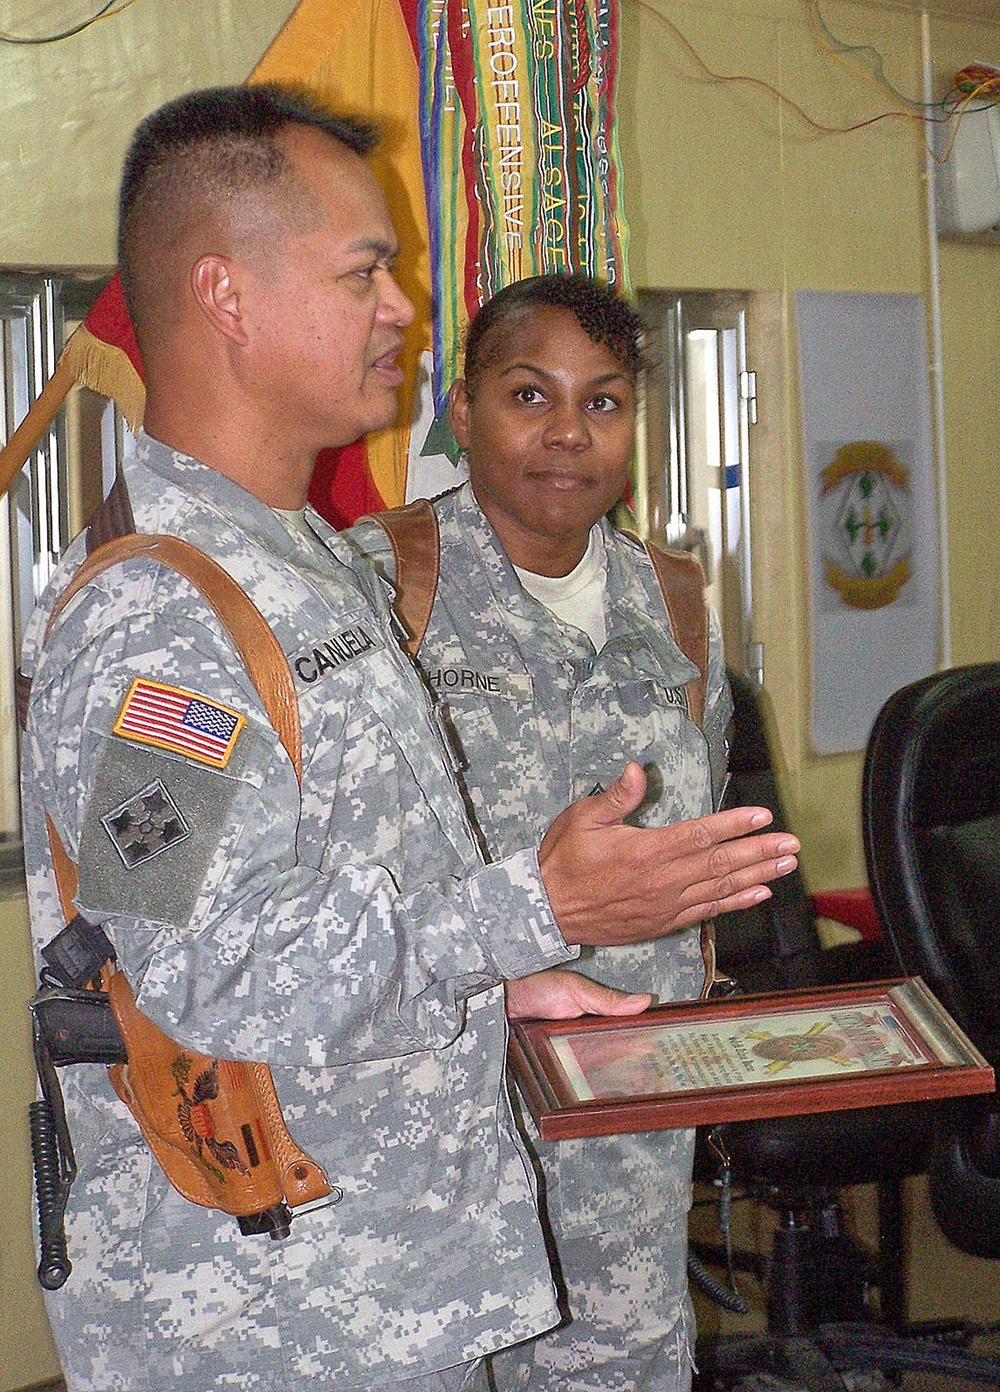 Fires Bde. recognizes retention success with awards luncheon